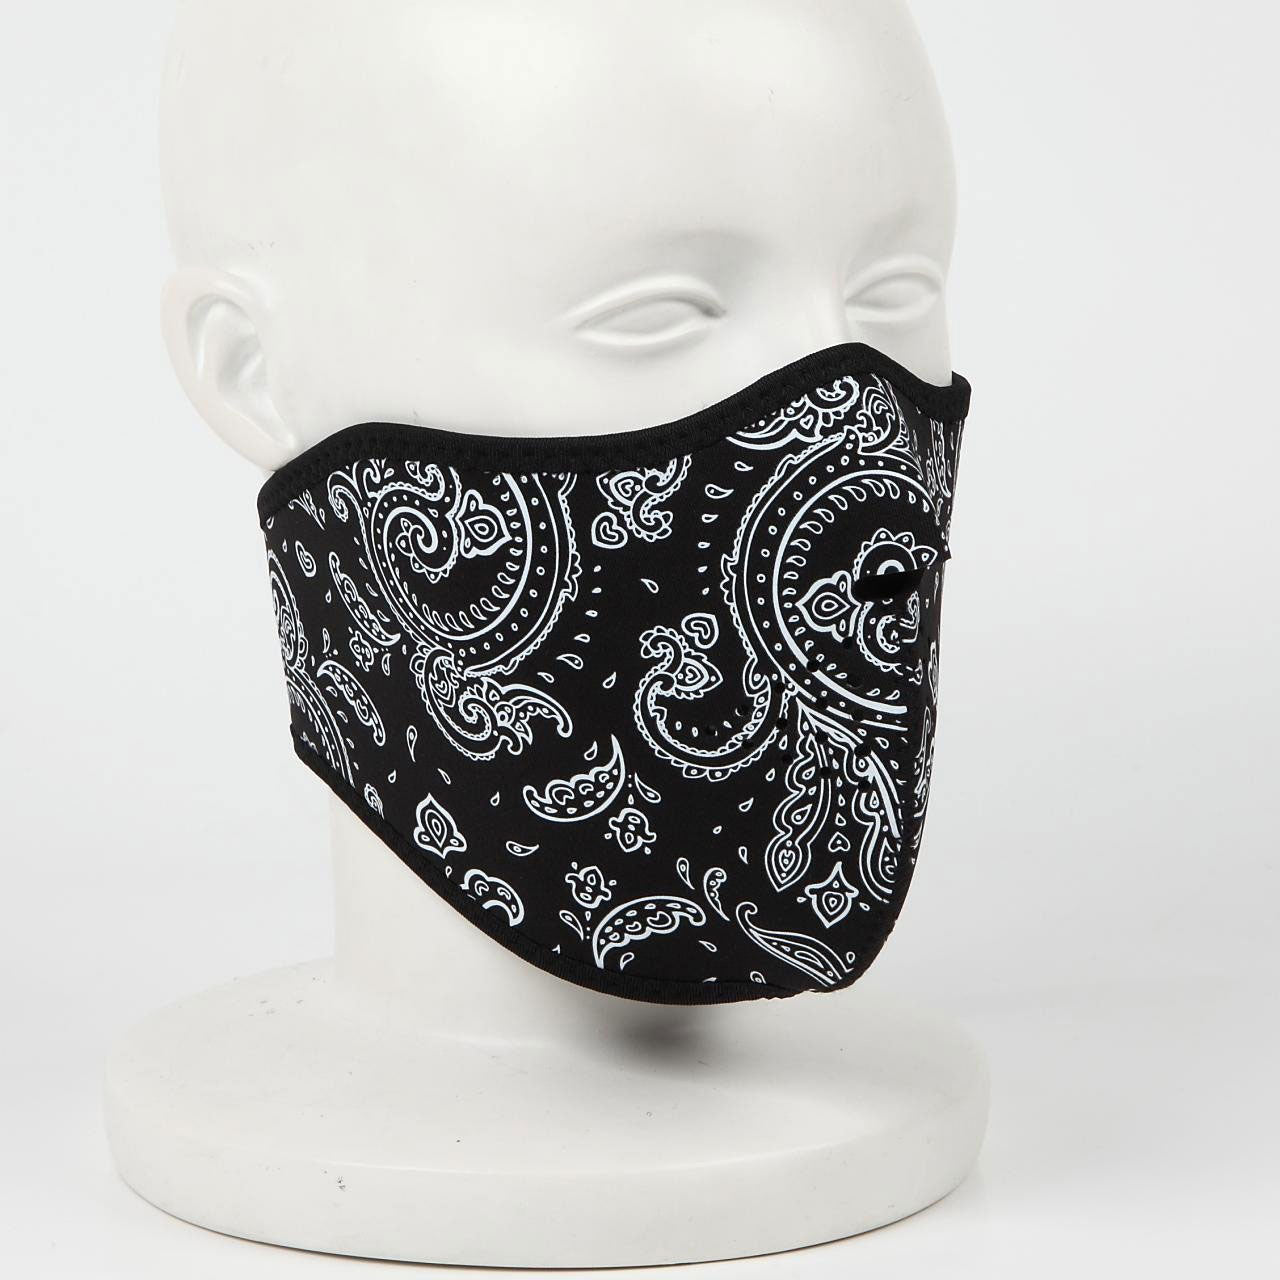 NEO FACEMASK RFM08 PAISLEY WHITE